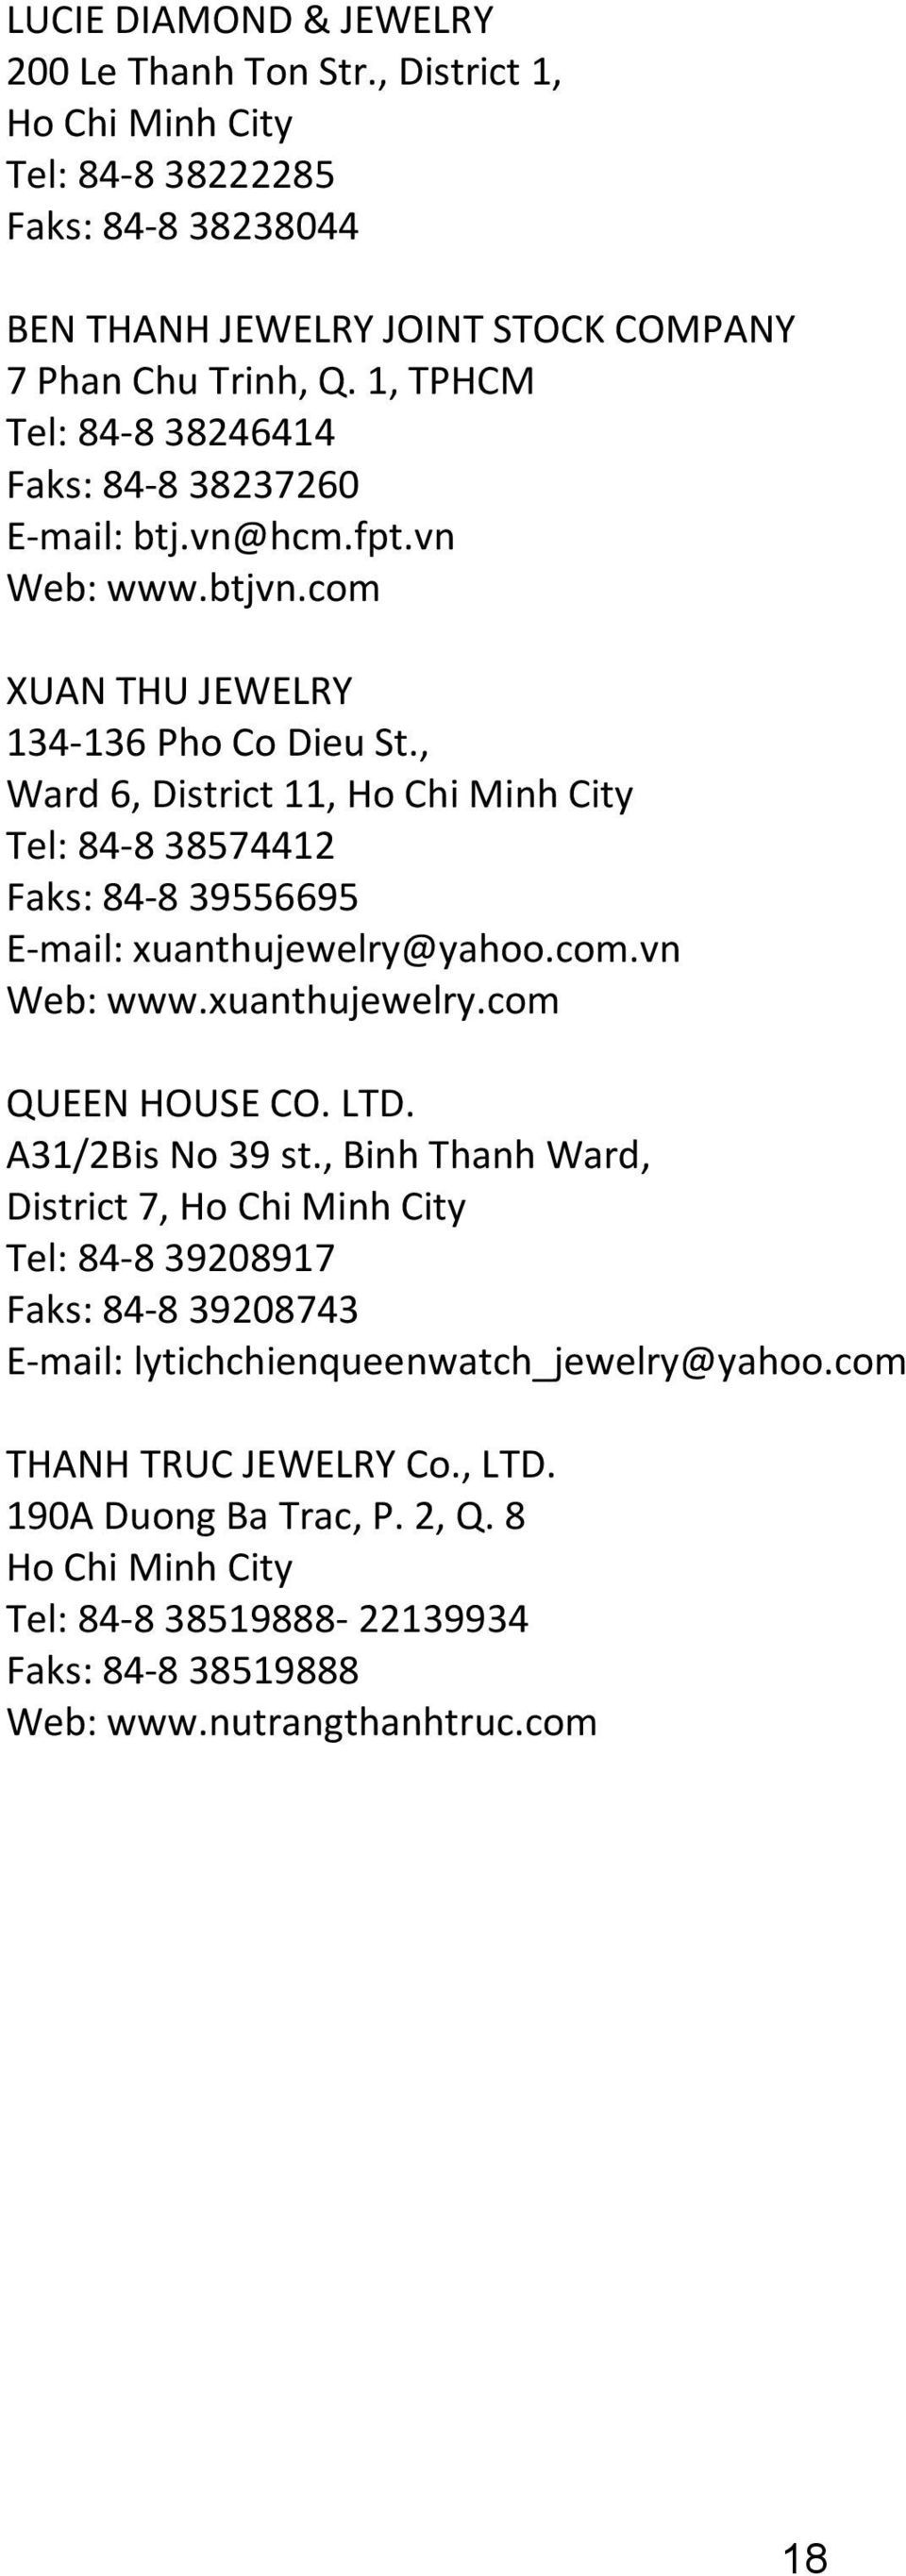 , Ward 6, District 11, Ho Chi Minh City Tel: 84 8 38574412 Faks: 84 8 39556695 E mail: xuanthujewelry@yahoo.com.vn Web: www.xuanthujewelry.com QUEEN HOUSE CO. LTD. A31/2Bis No 39 st.